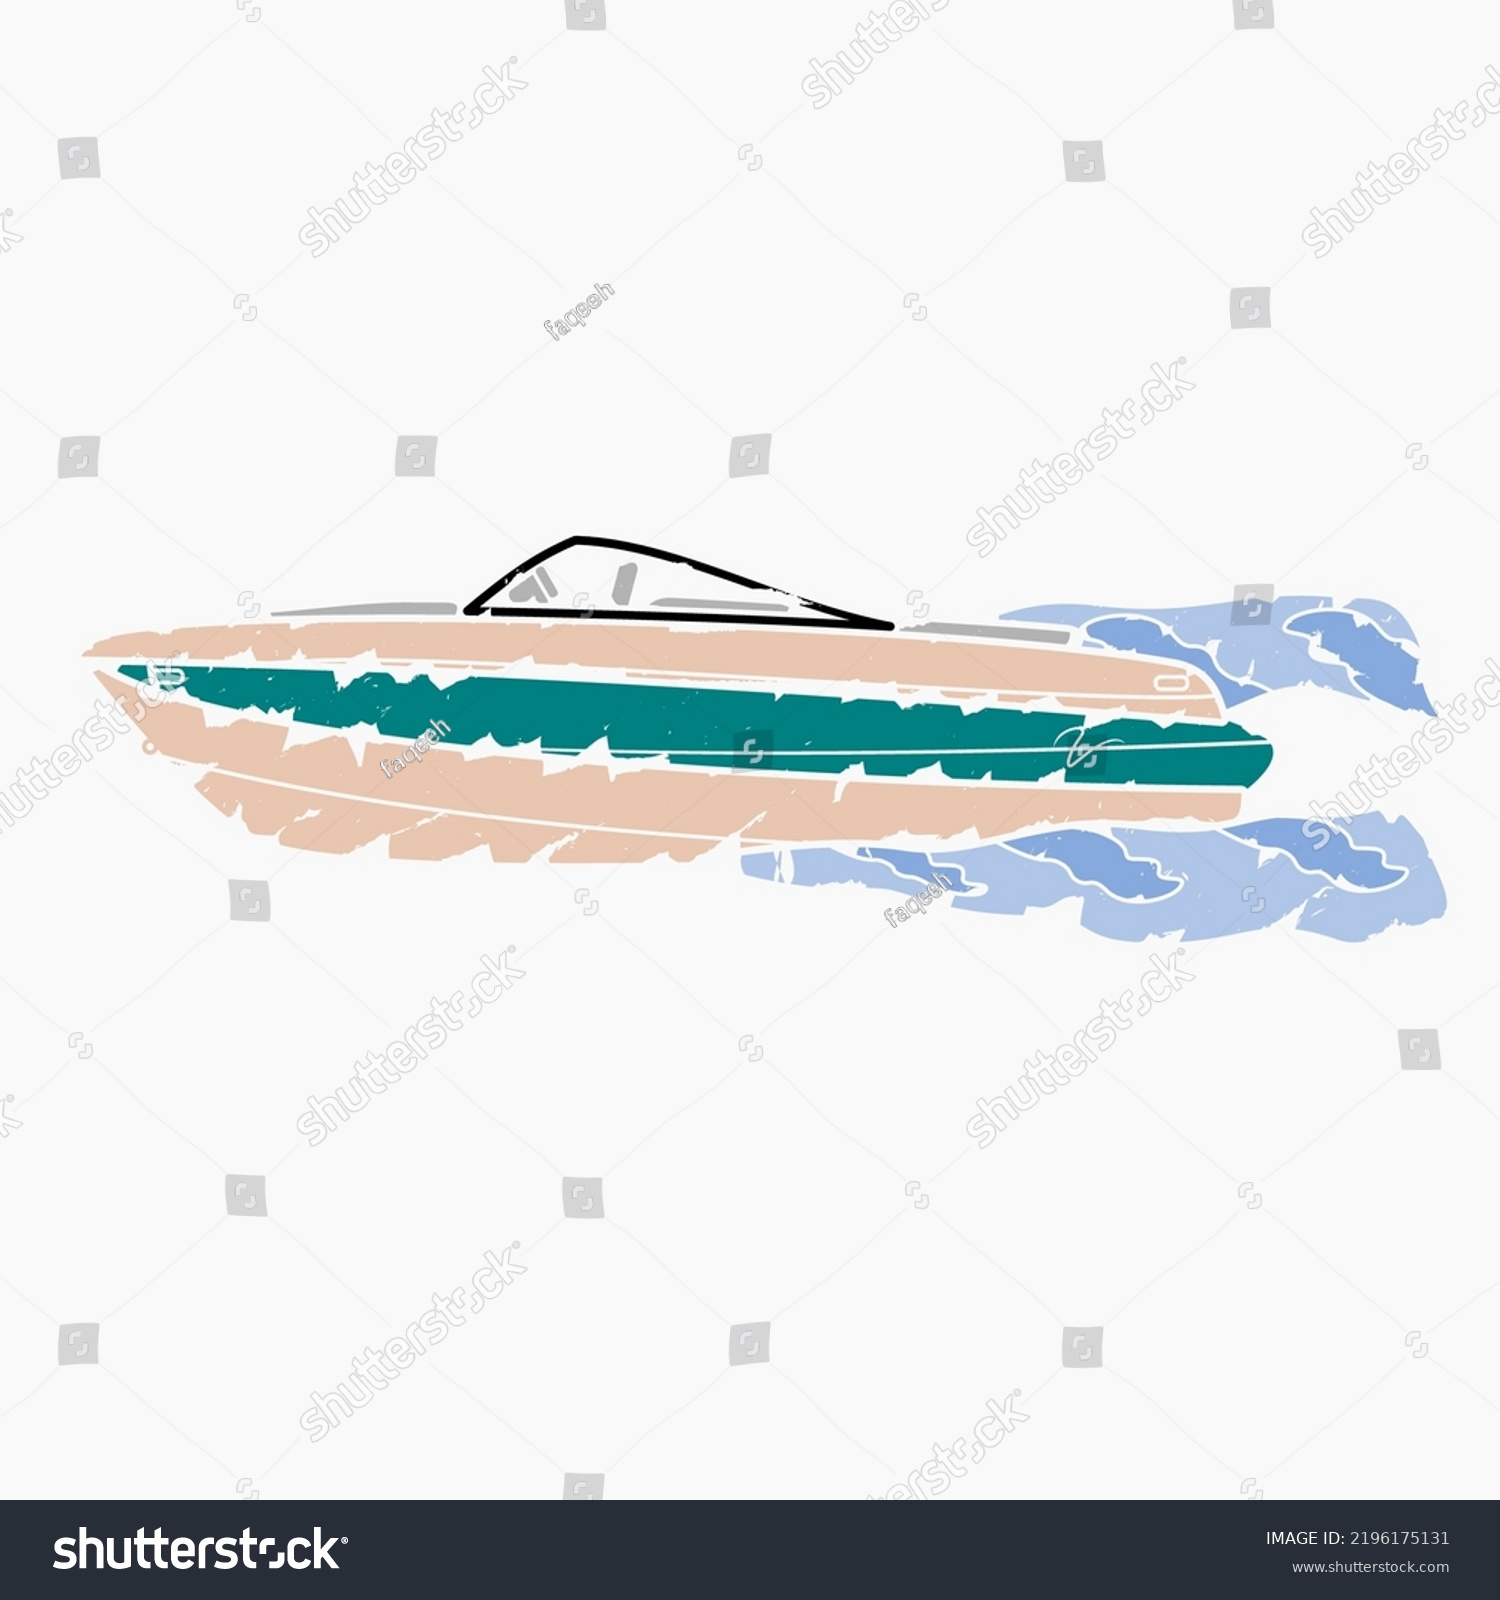 SVG of Editable Side View American Bowrider Boat on Water Vector Illustration in Brush Strokes Style for Artwork Element of Transportation or Recreation Related Design svg